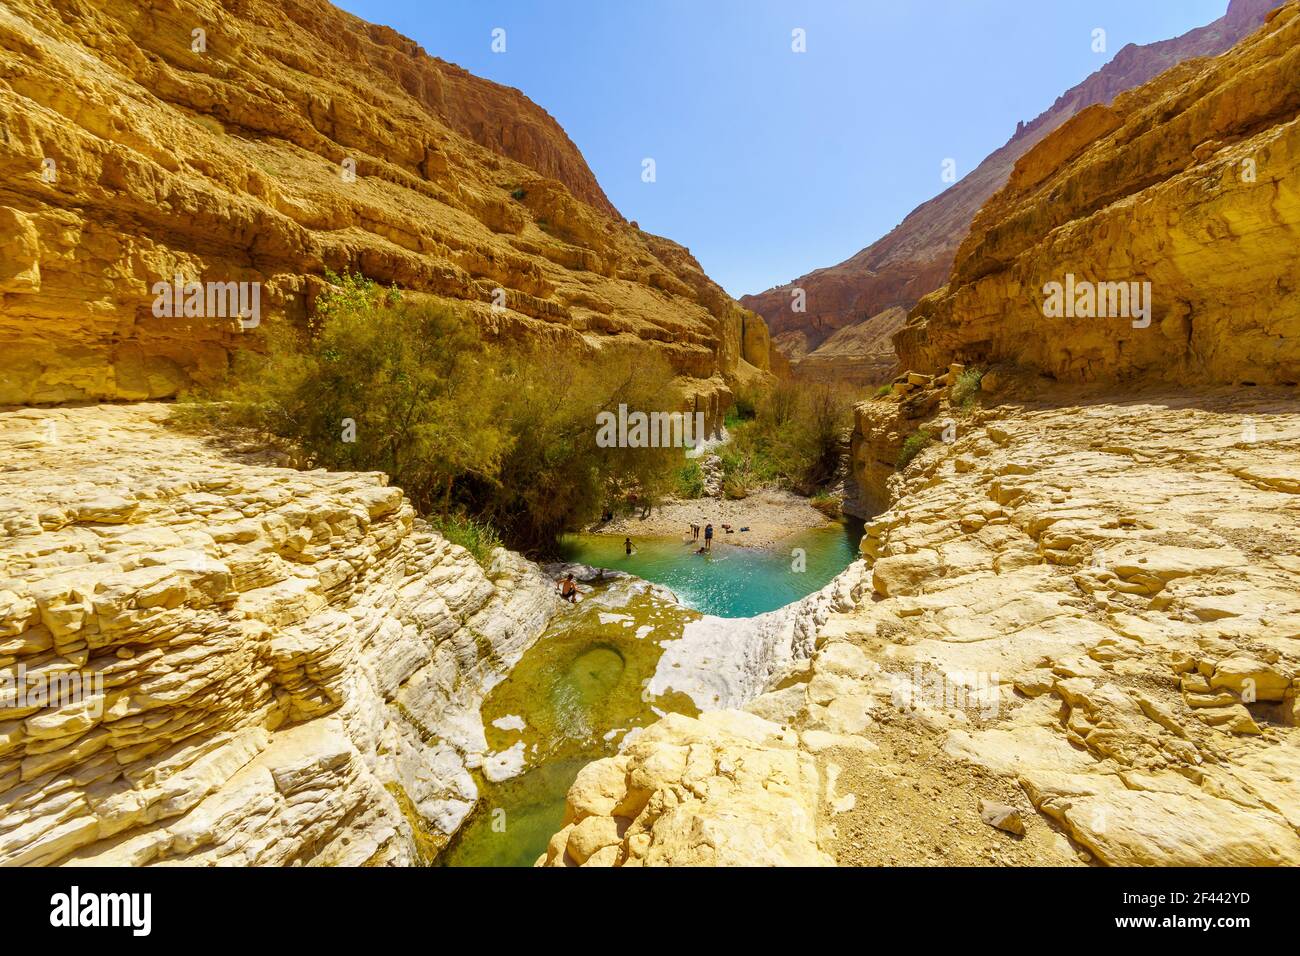 Ein Gedi Reserve High Resolution Stock Photography Images - Alamy